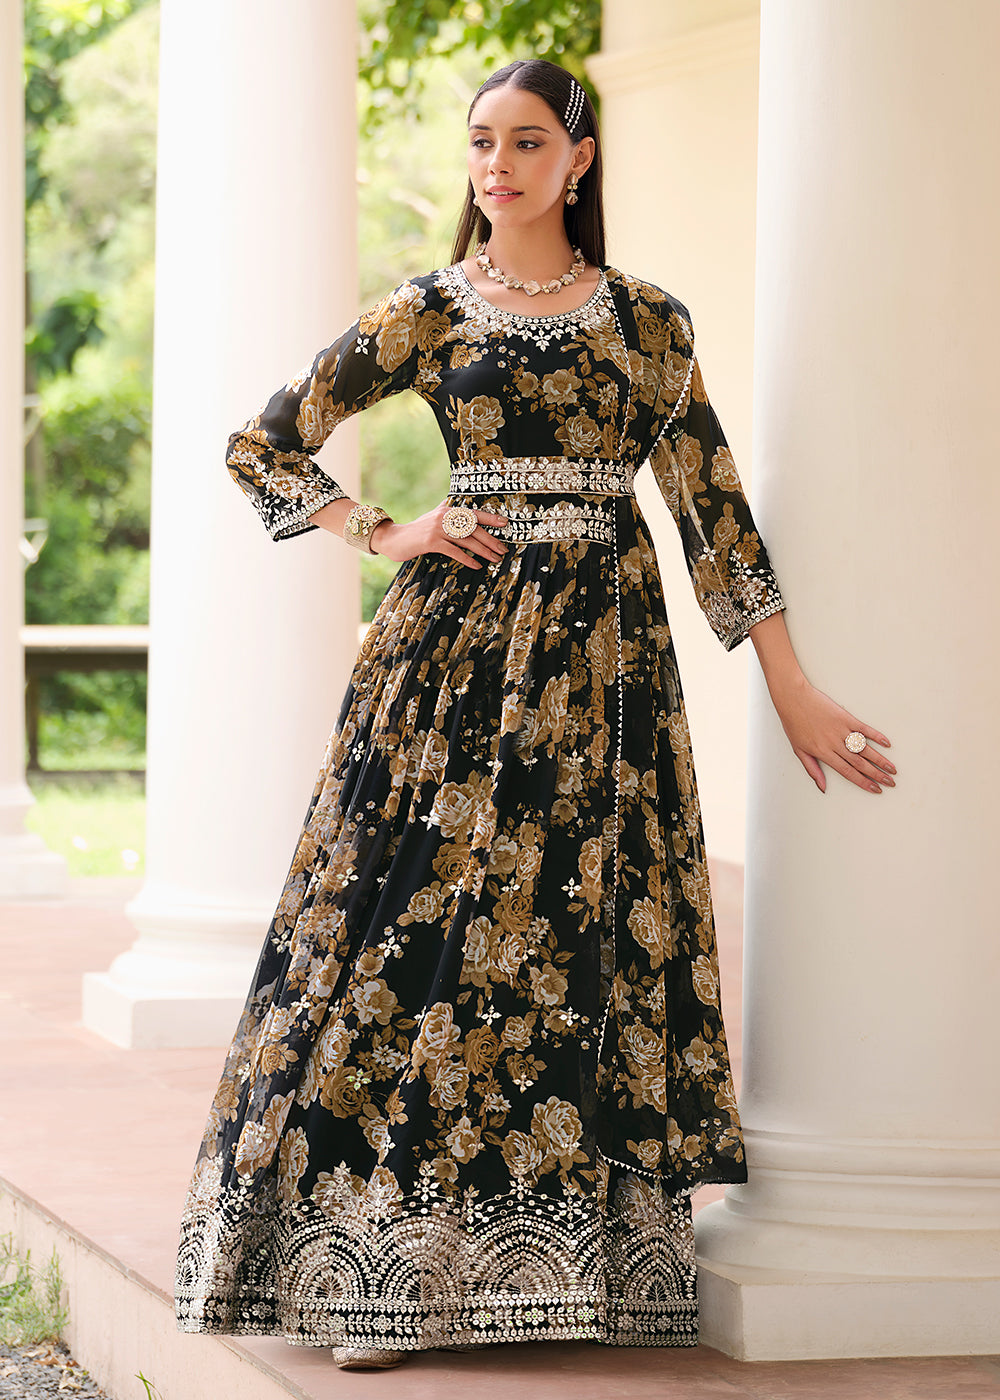 Buy Now Black Floral Digital Printed & Embroidered Festive Anarkali Gown Online in USA, UK, Australia, New Zealand, Canada & Worldwide at Empress Clothing.